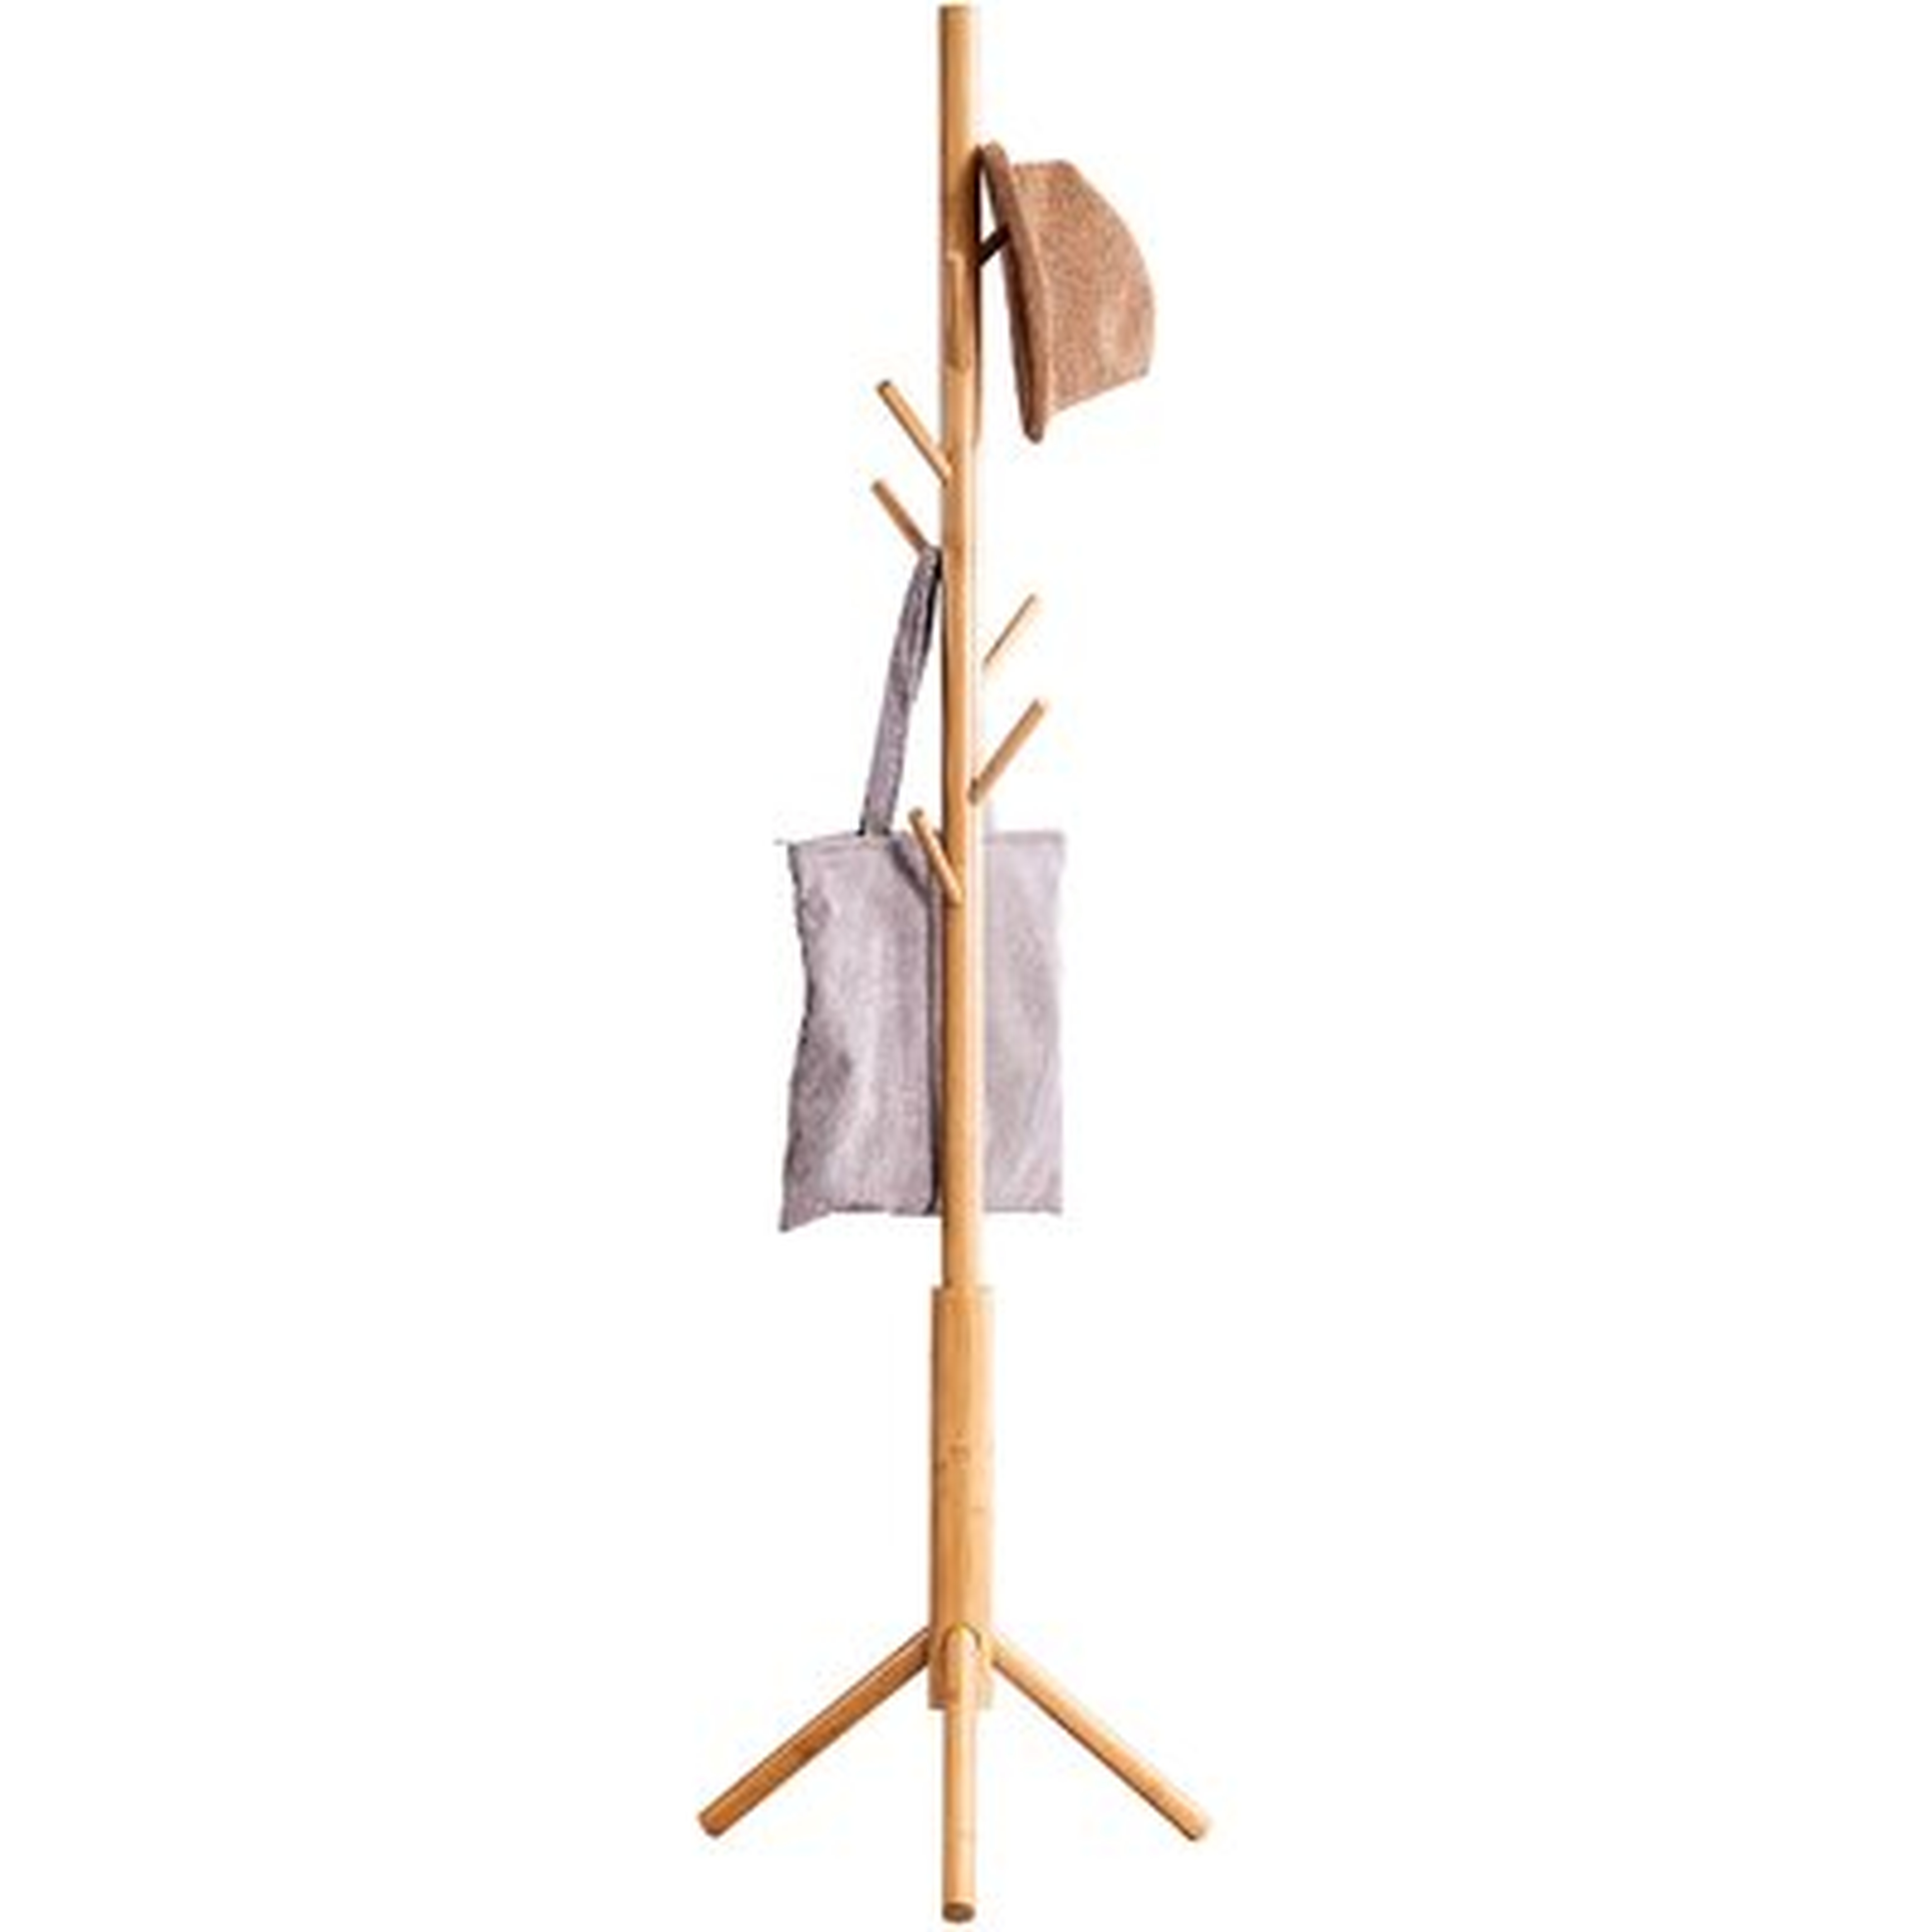 Free Standing Coat Rack Stand, Adjustable Coat Tree With 3 Sections & 8 Hooks, Easy To Assemble Coat Hanger Stand For Bedroom, Office, Hallway, Entryway, - Wayfair